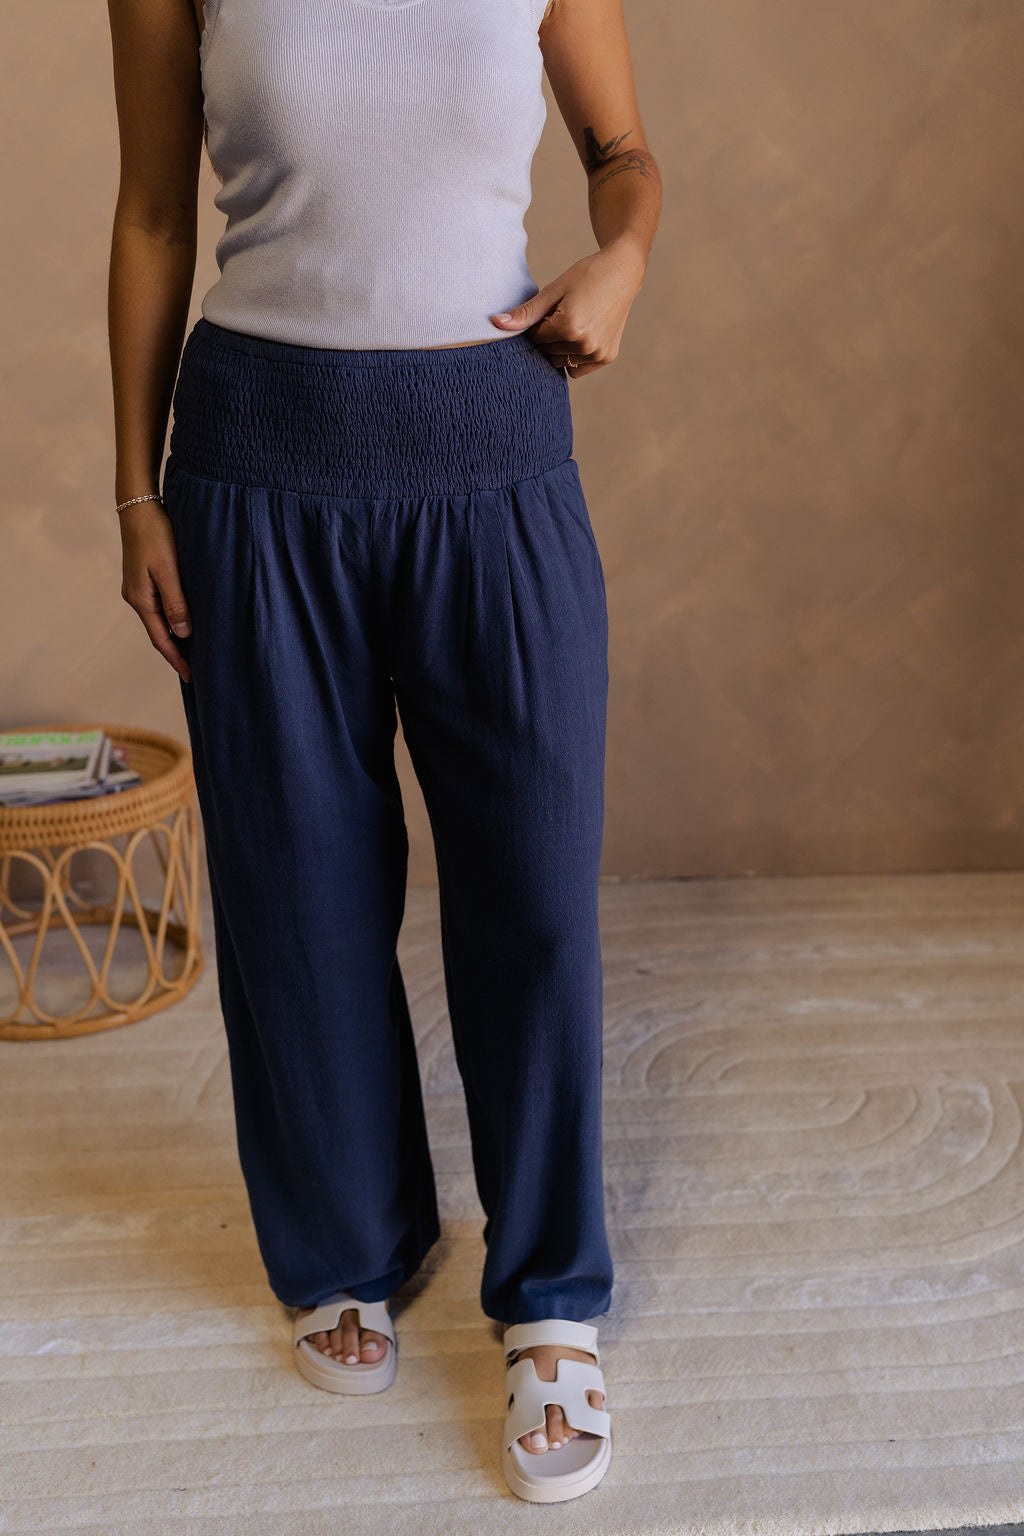 Front view of female model wearing the Olivia Navy Blue Smocked Pants which features Navy Knit Fabric, Wide Pant Legs, Navy Lining and Smocked Waistband